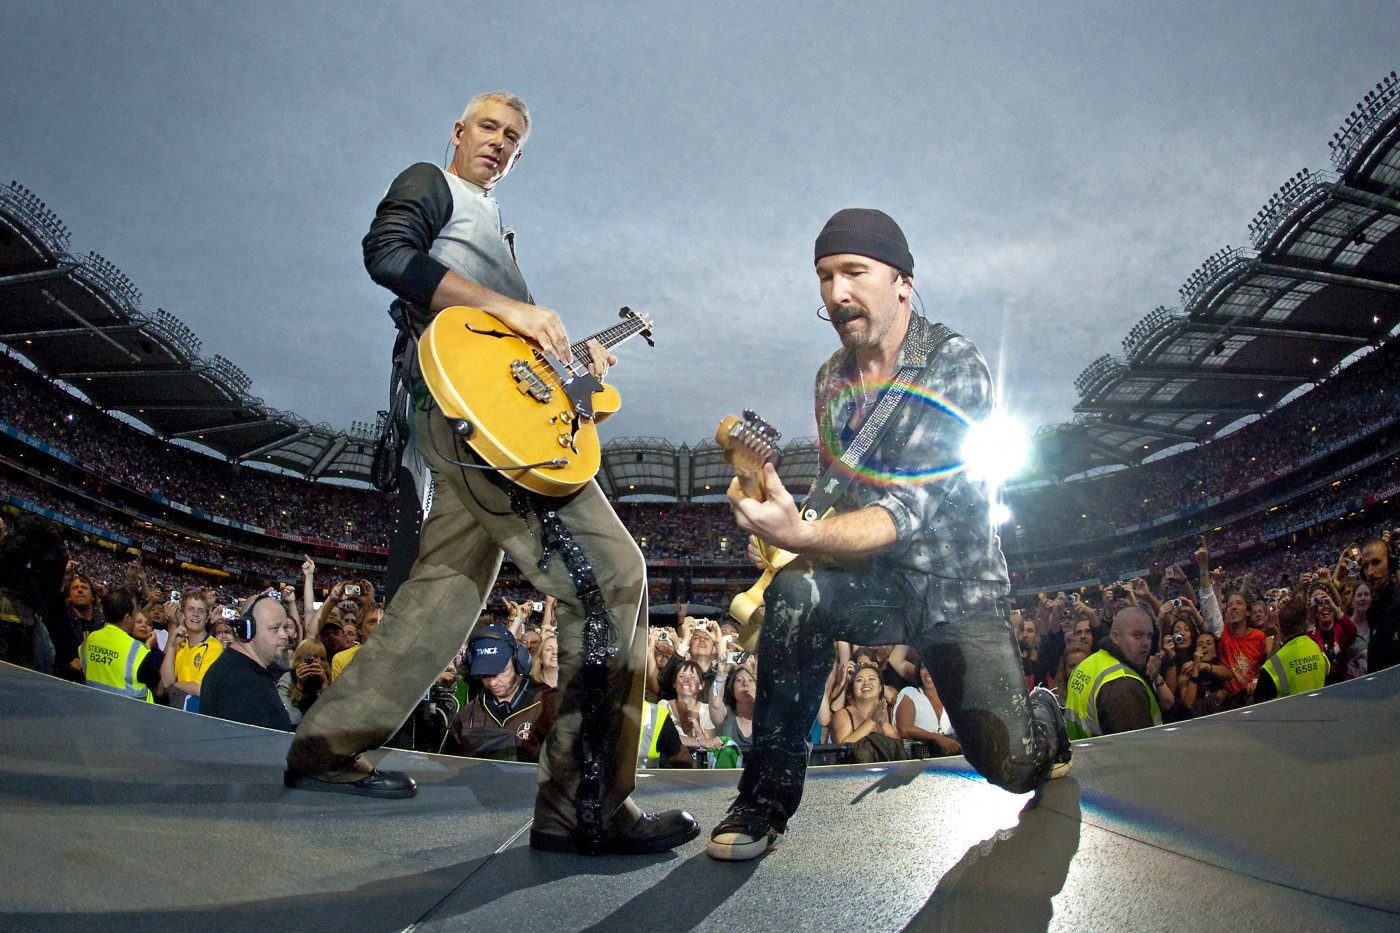 U2 by 2023 Photographer of the Year Neil Lupin